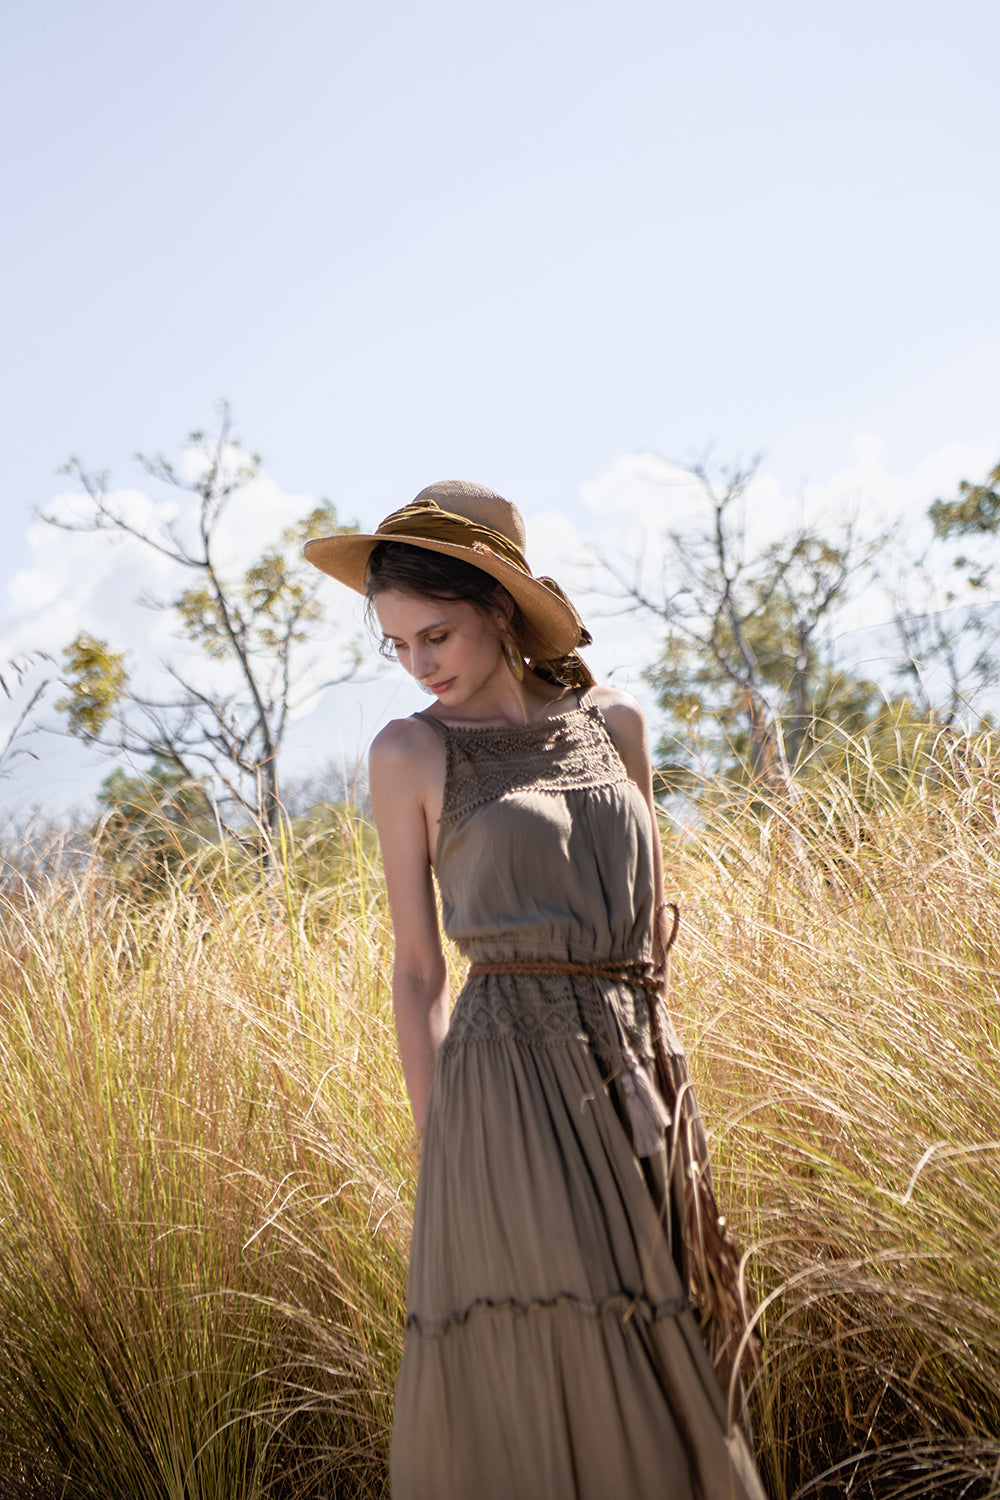 Chloe Halter Maxi Frill Dress - Desert Sand - The Fields of Gold by Tulle and Batiste